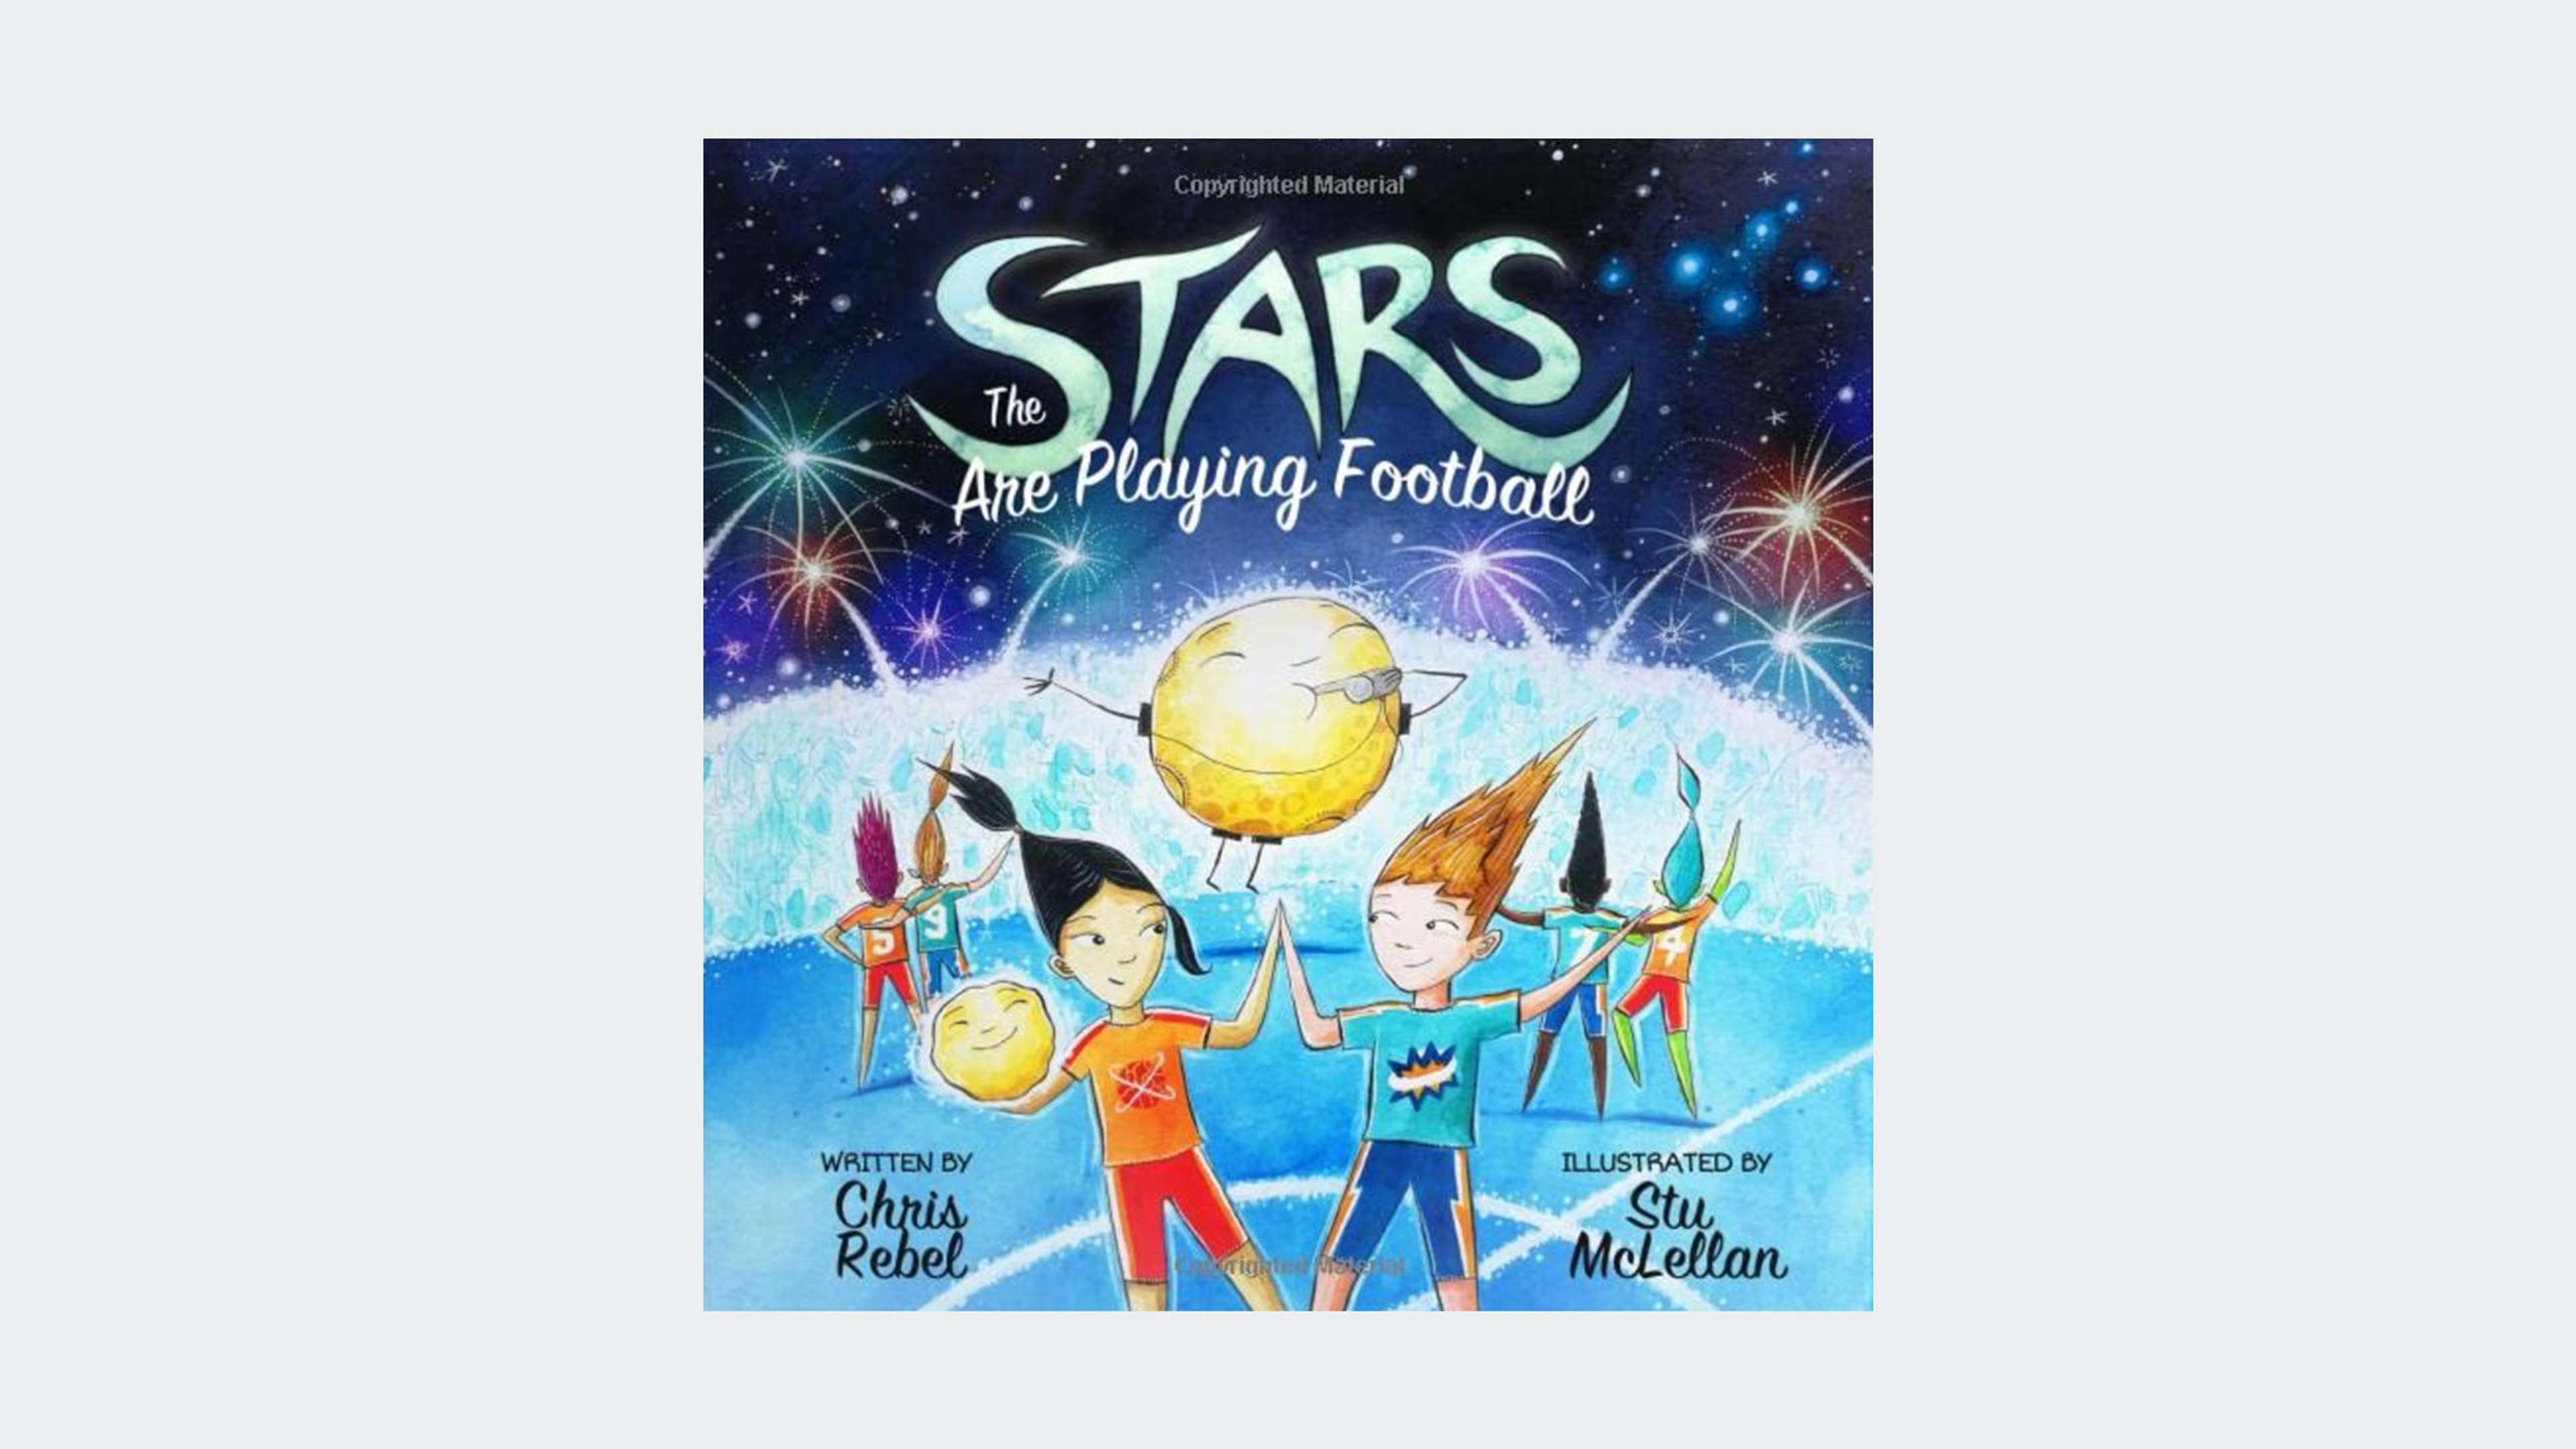 The Stars Are Playing Football